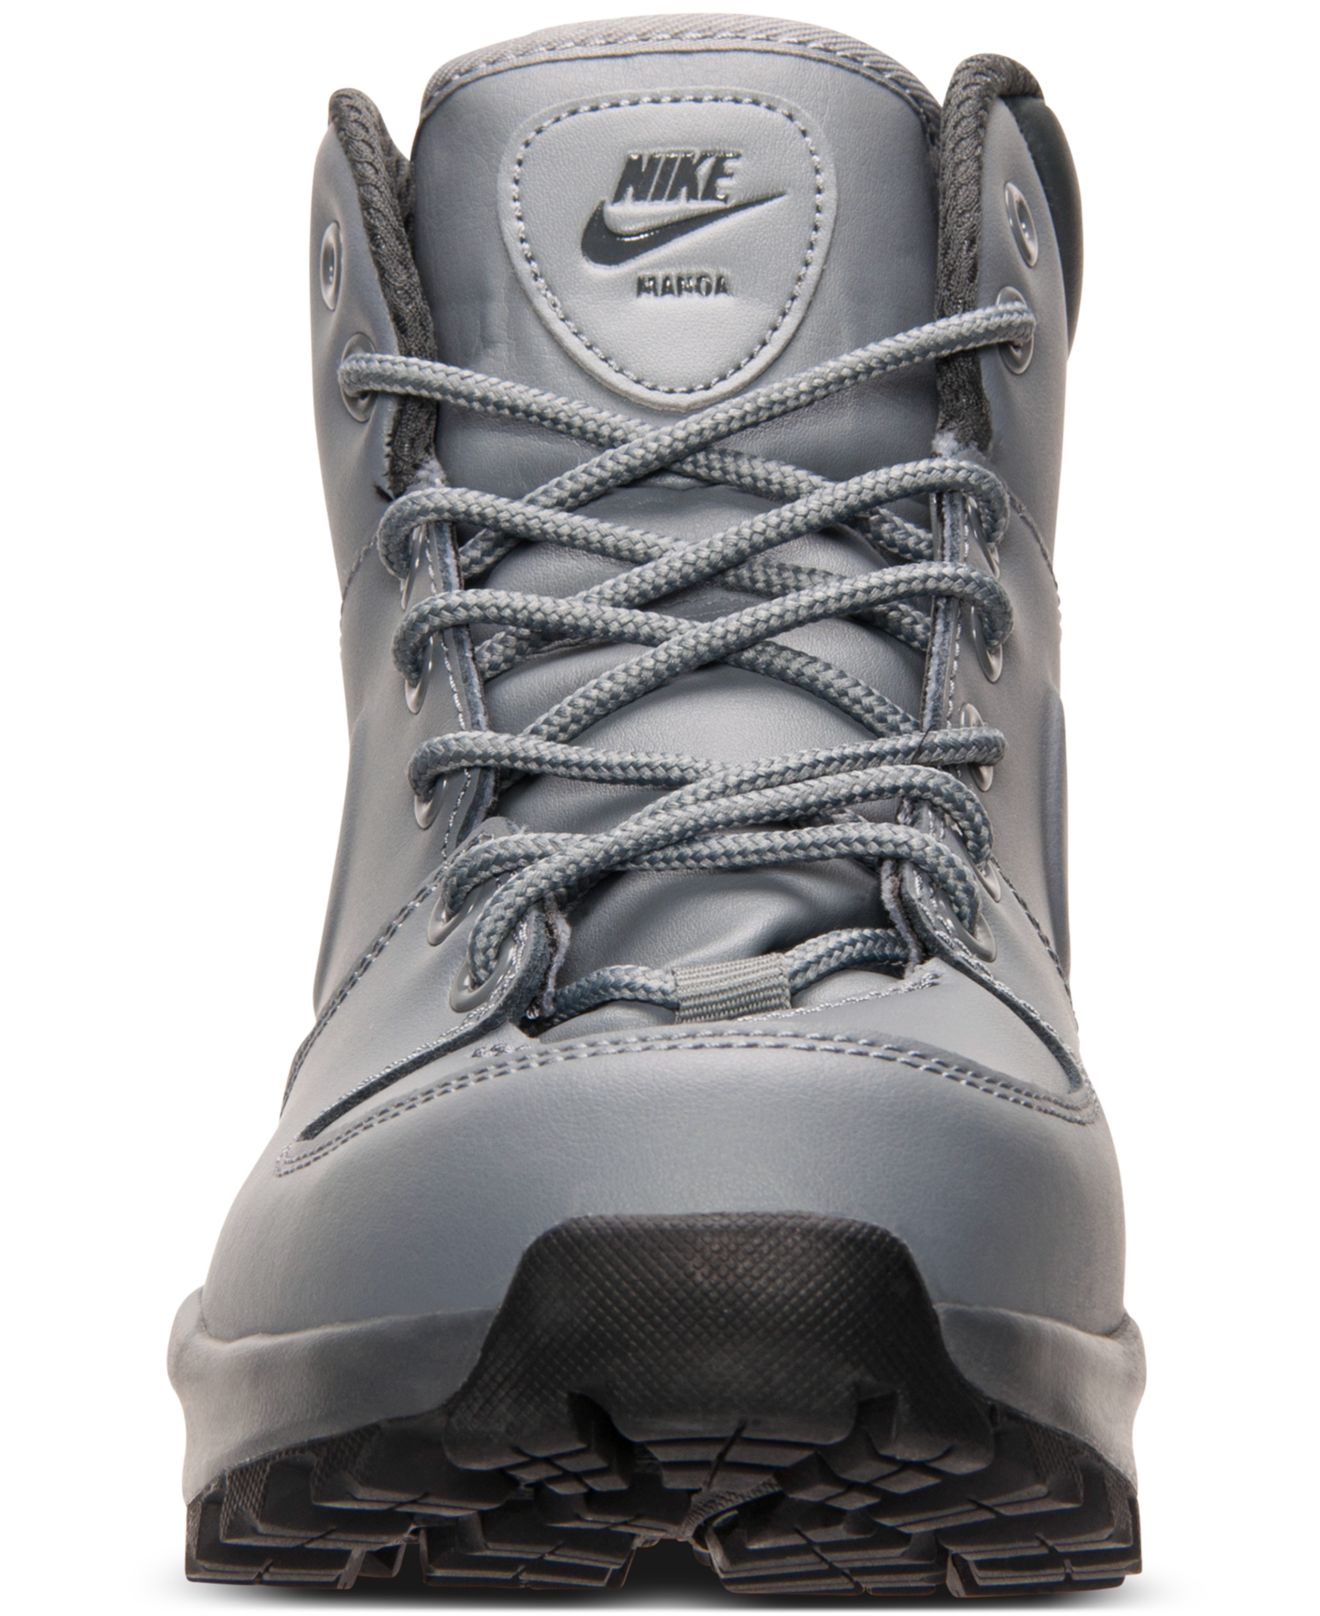 Lyst - Nike Men's Manoa Leather Boots From Finish Line in Gray for Men